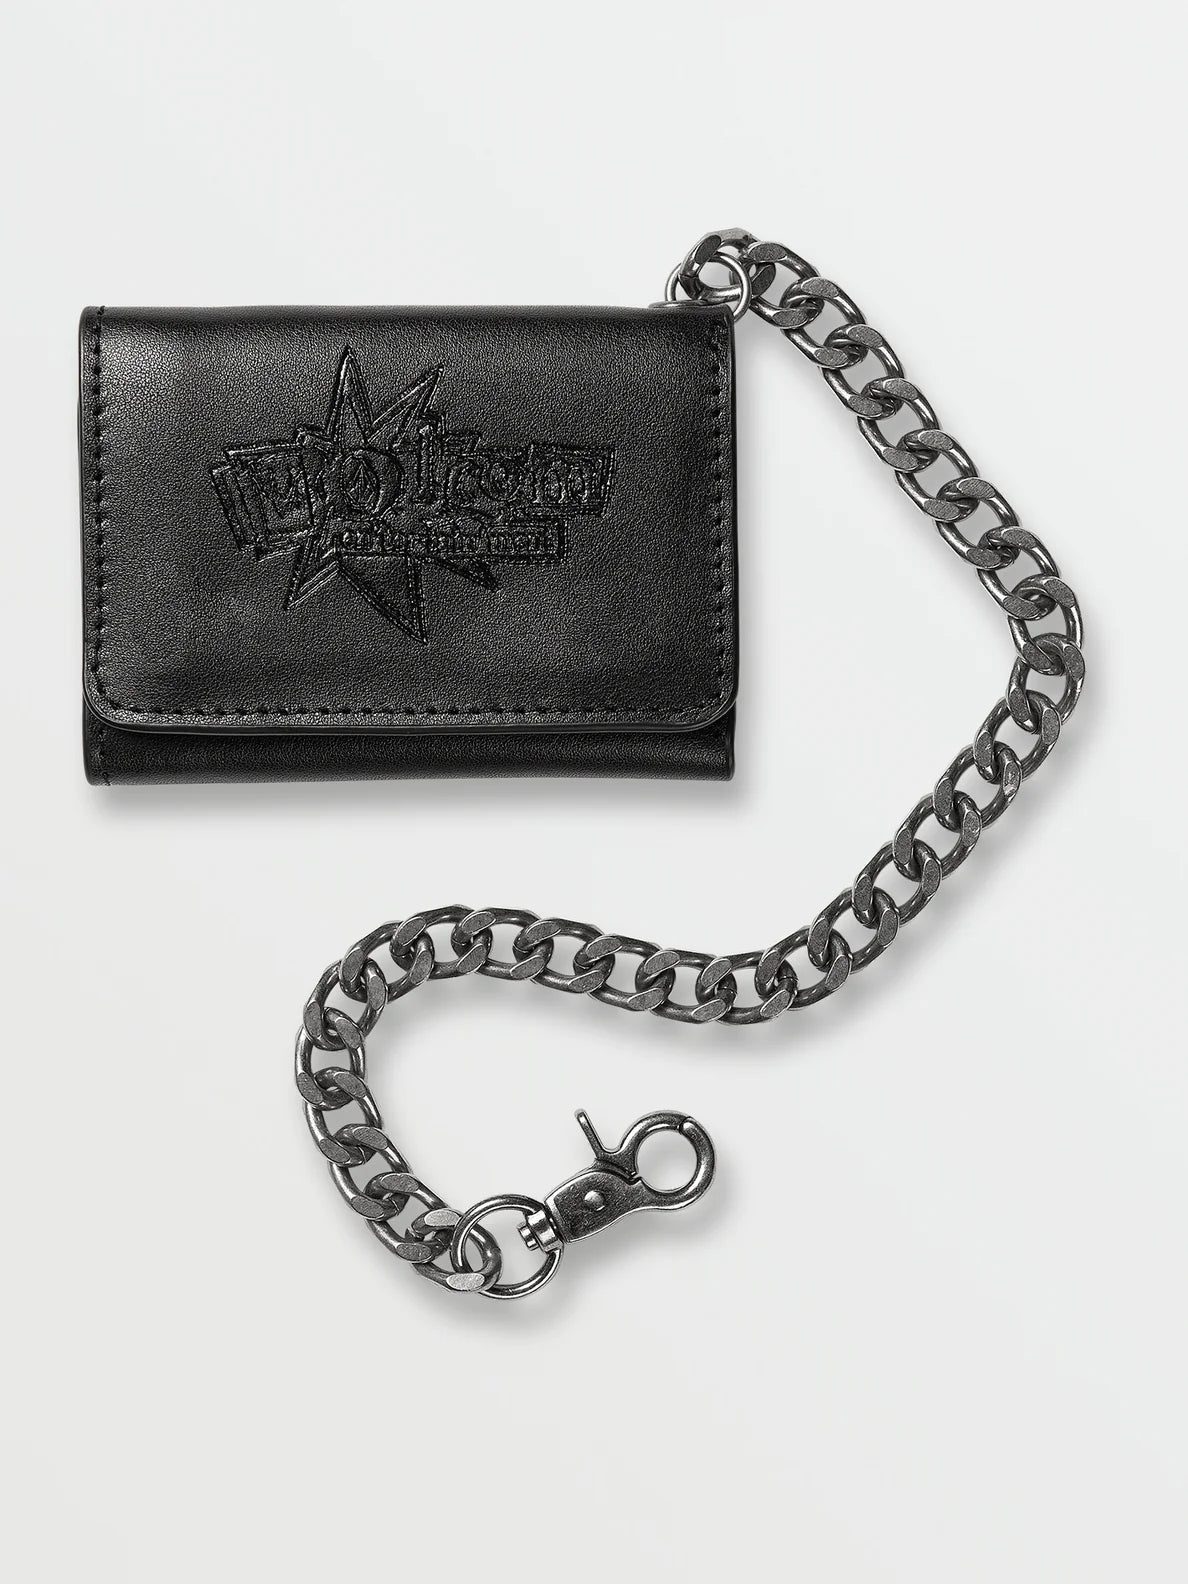 Entertainment Leather Wallet